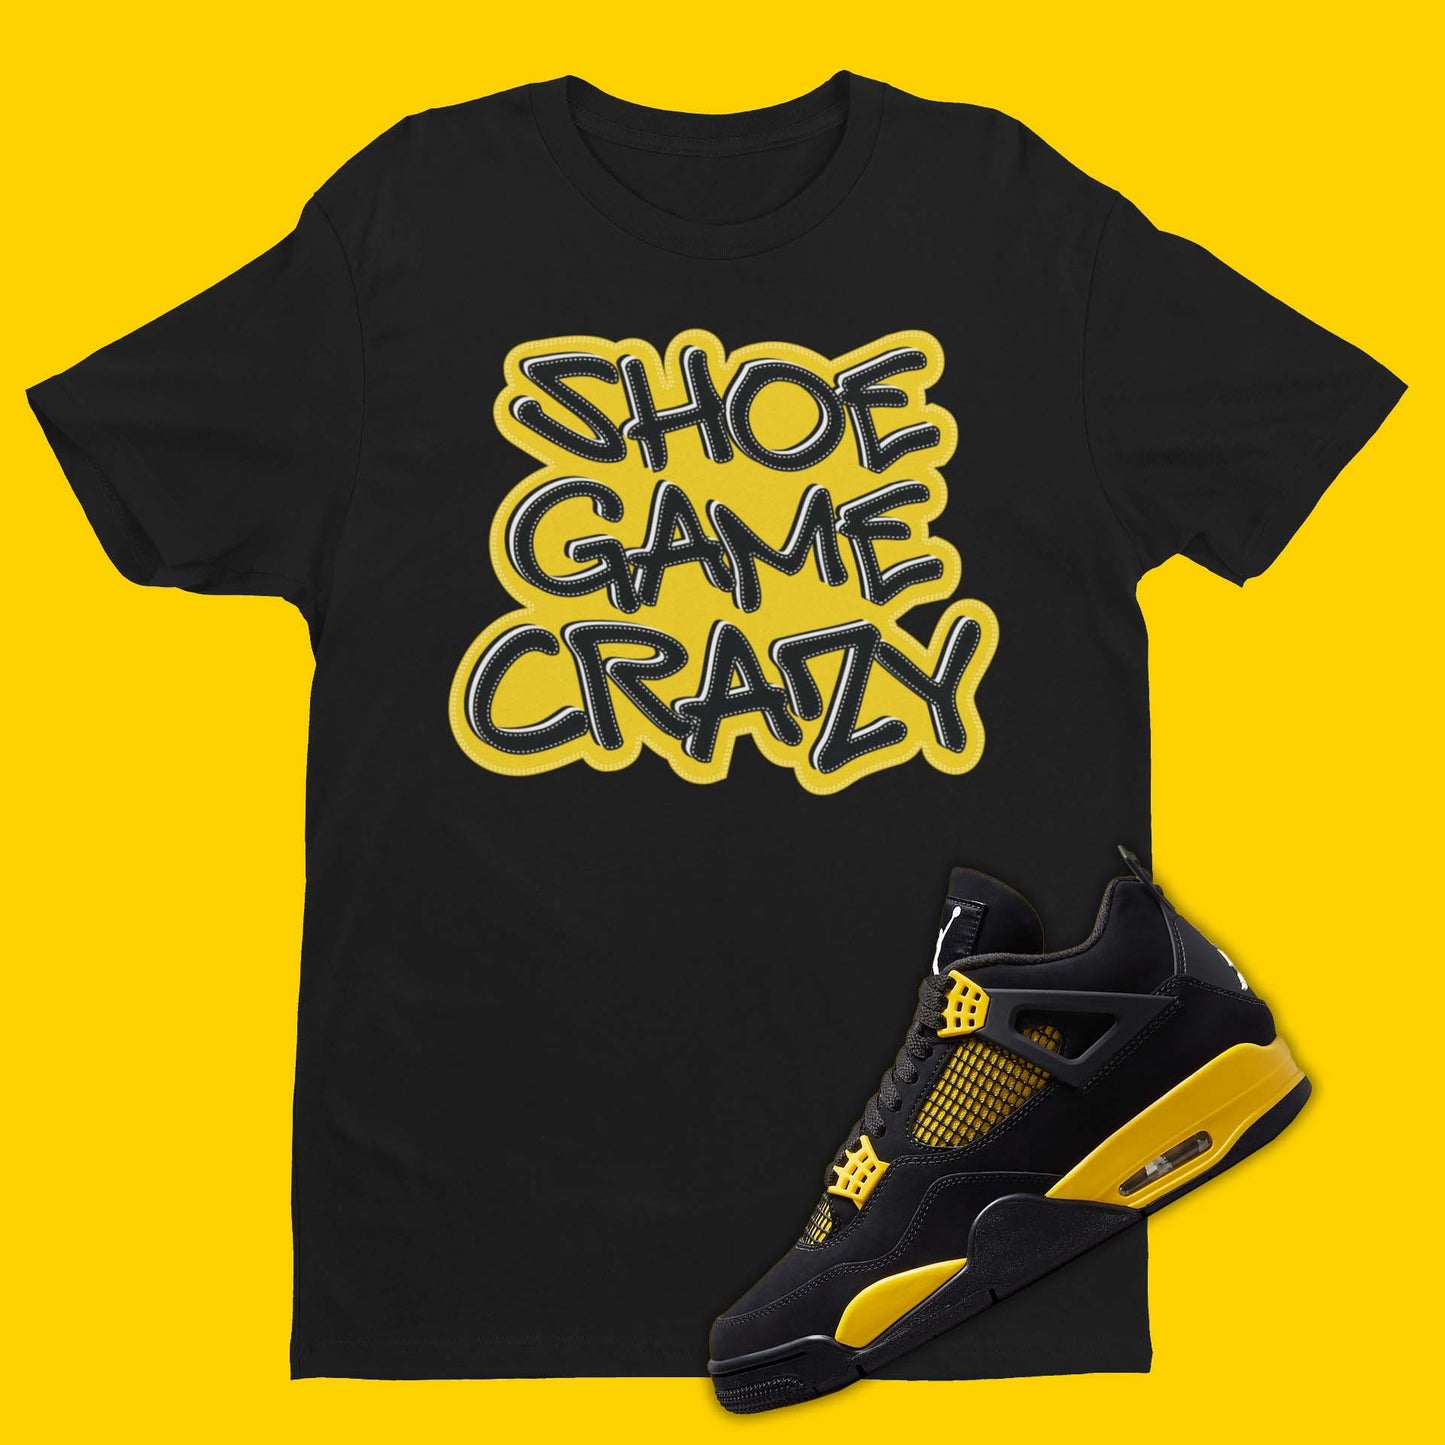 Shoe Game Crazy Air Jordan 4 Thunder Matching Shirt in black with graffiti text on front designed for sneakerheads.